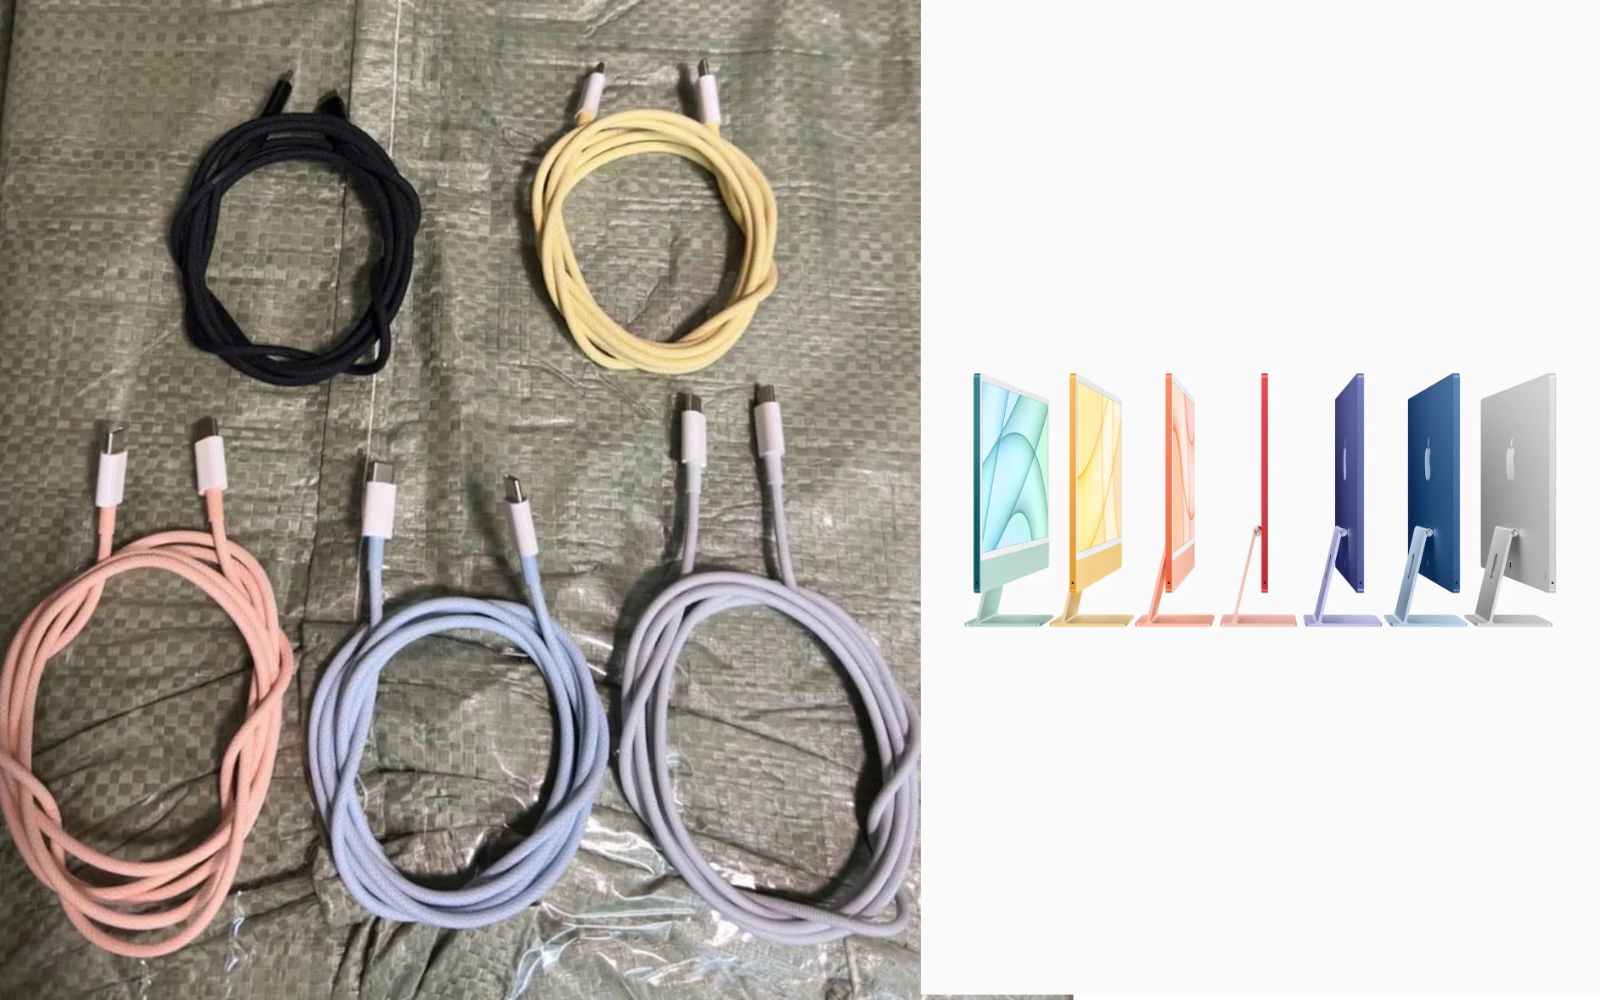 imac-and-usbc-cables.jpg